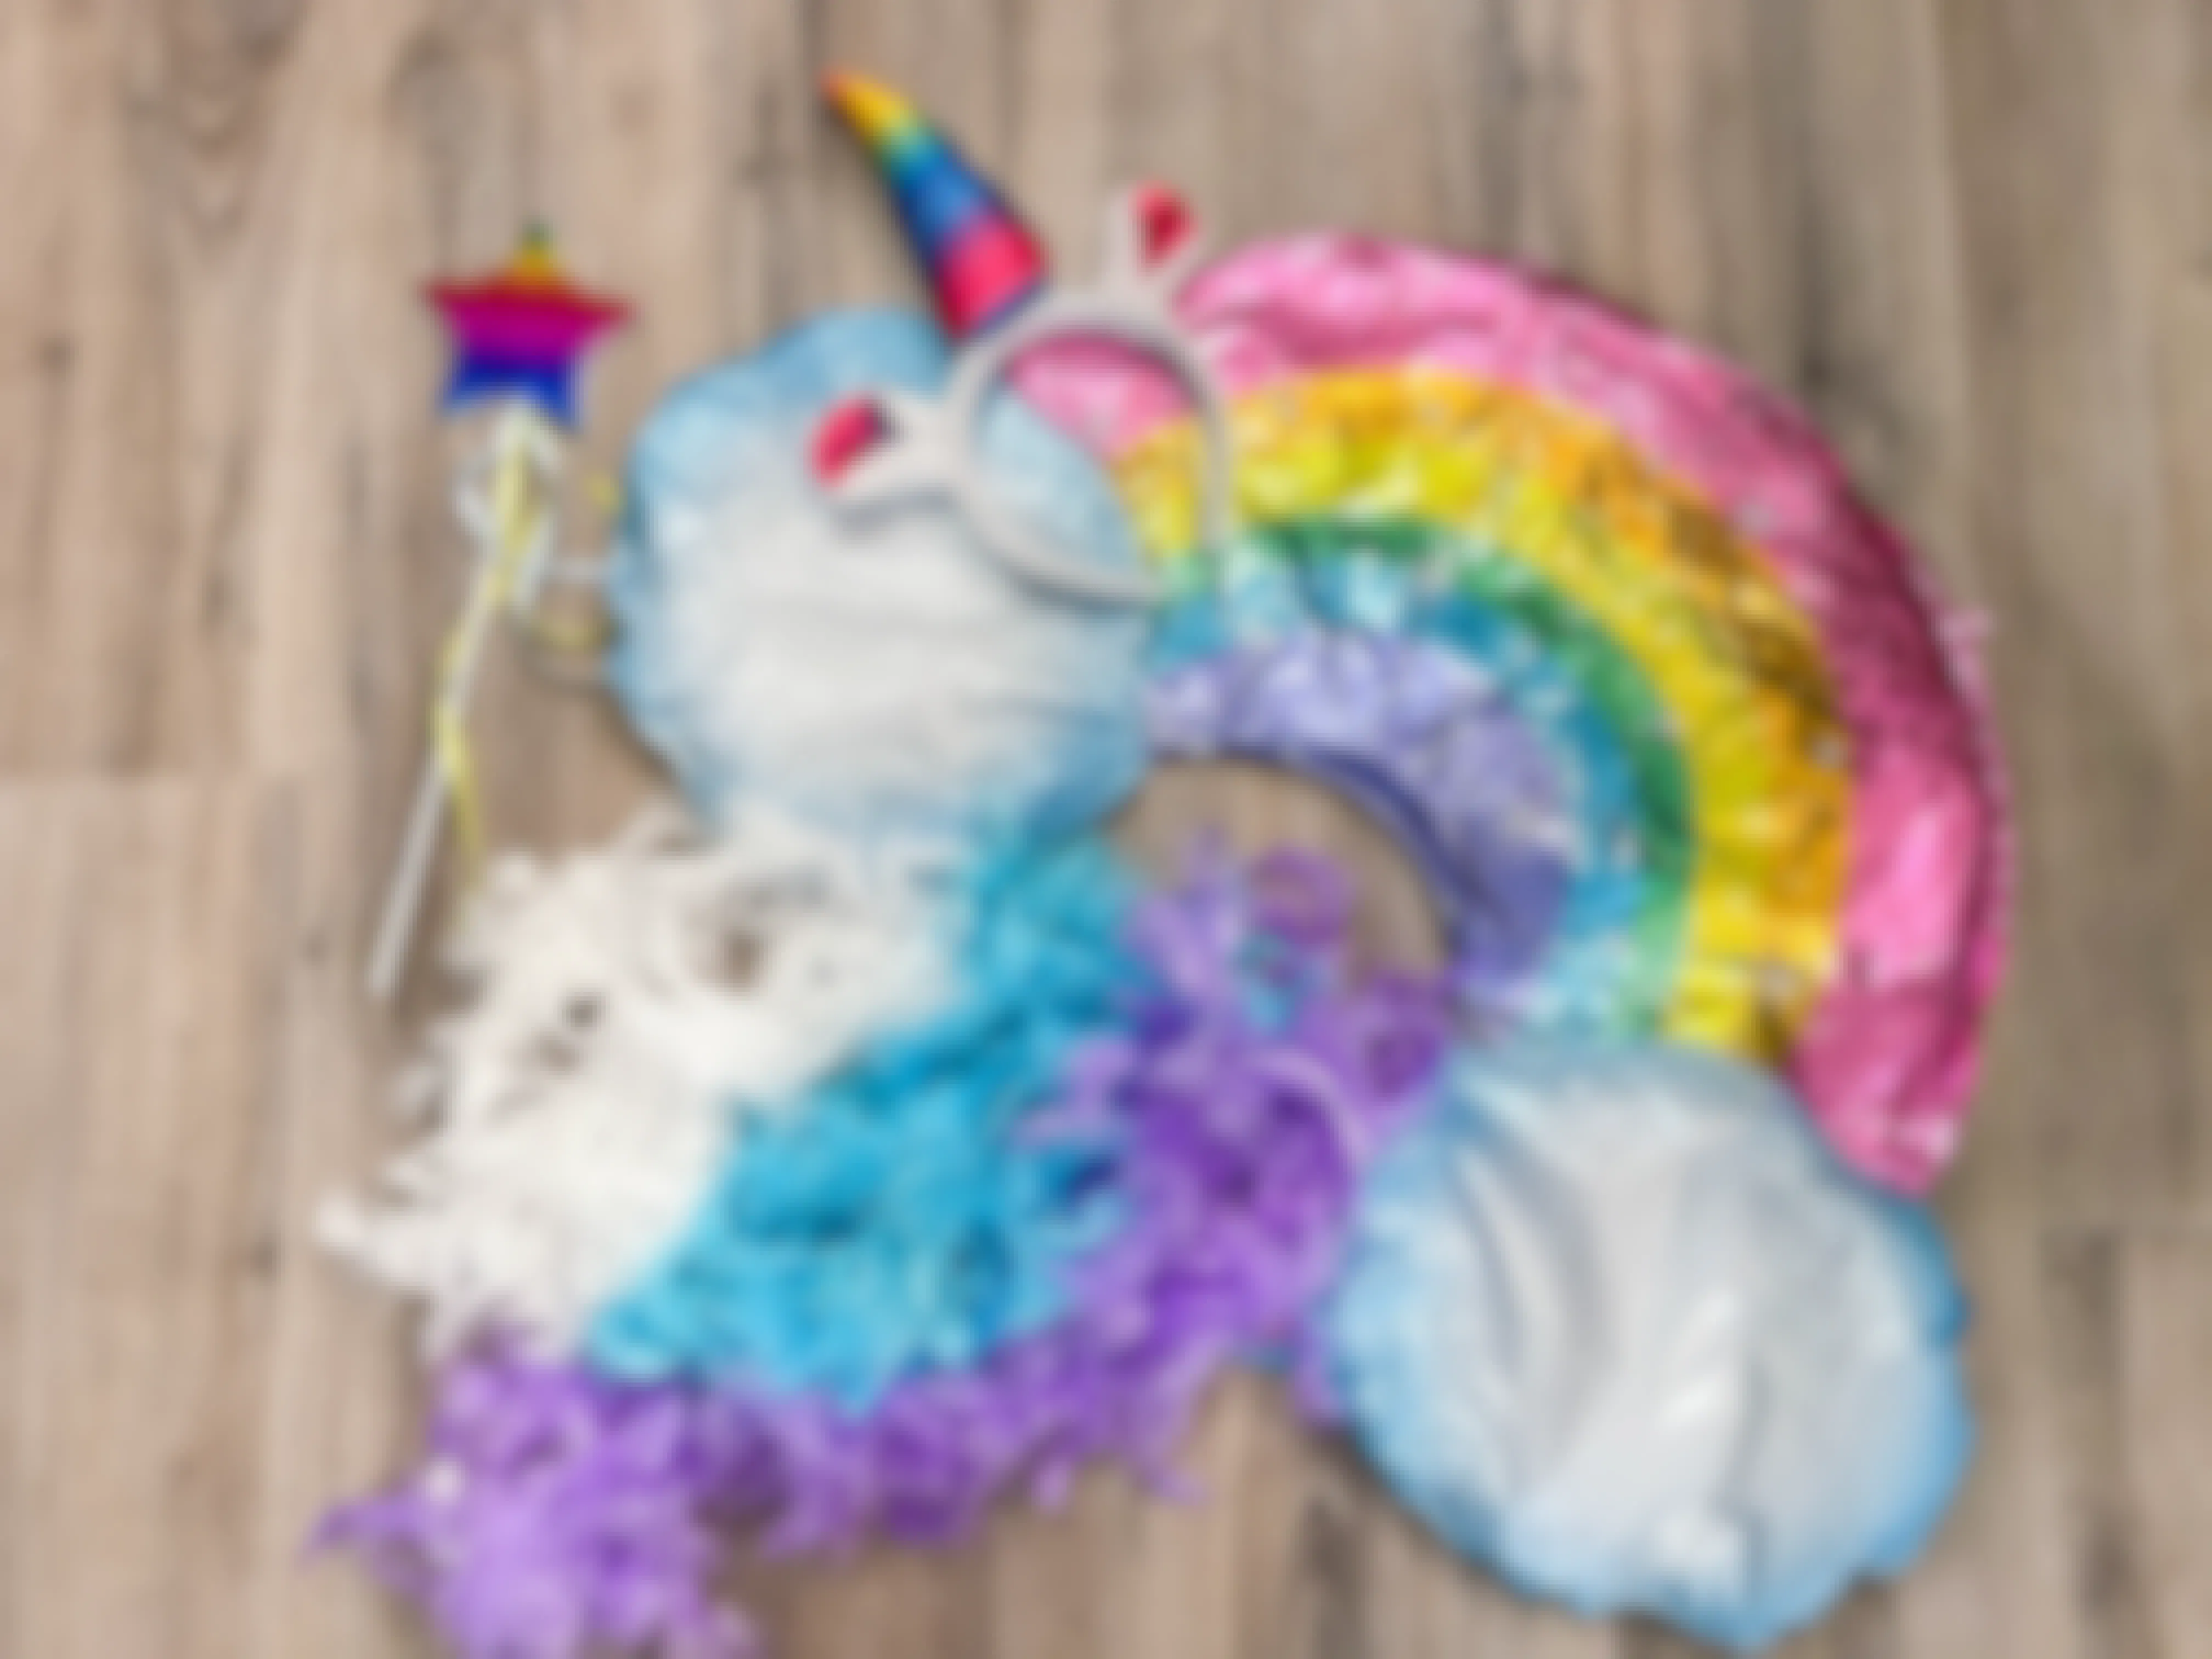 Materials for a DIY unicorn rainbow costume piled together on the floor.